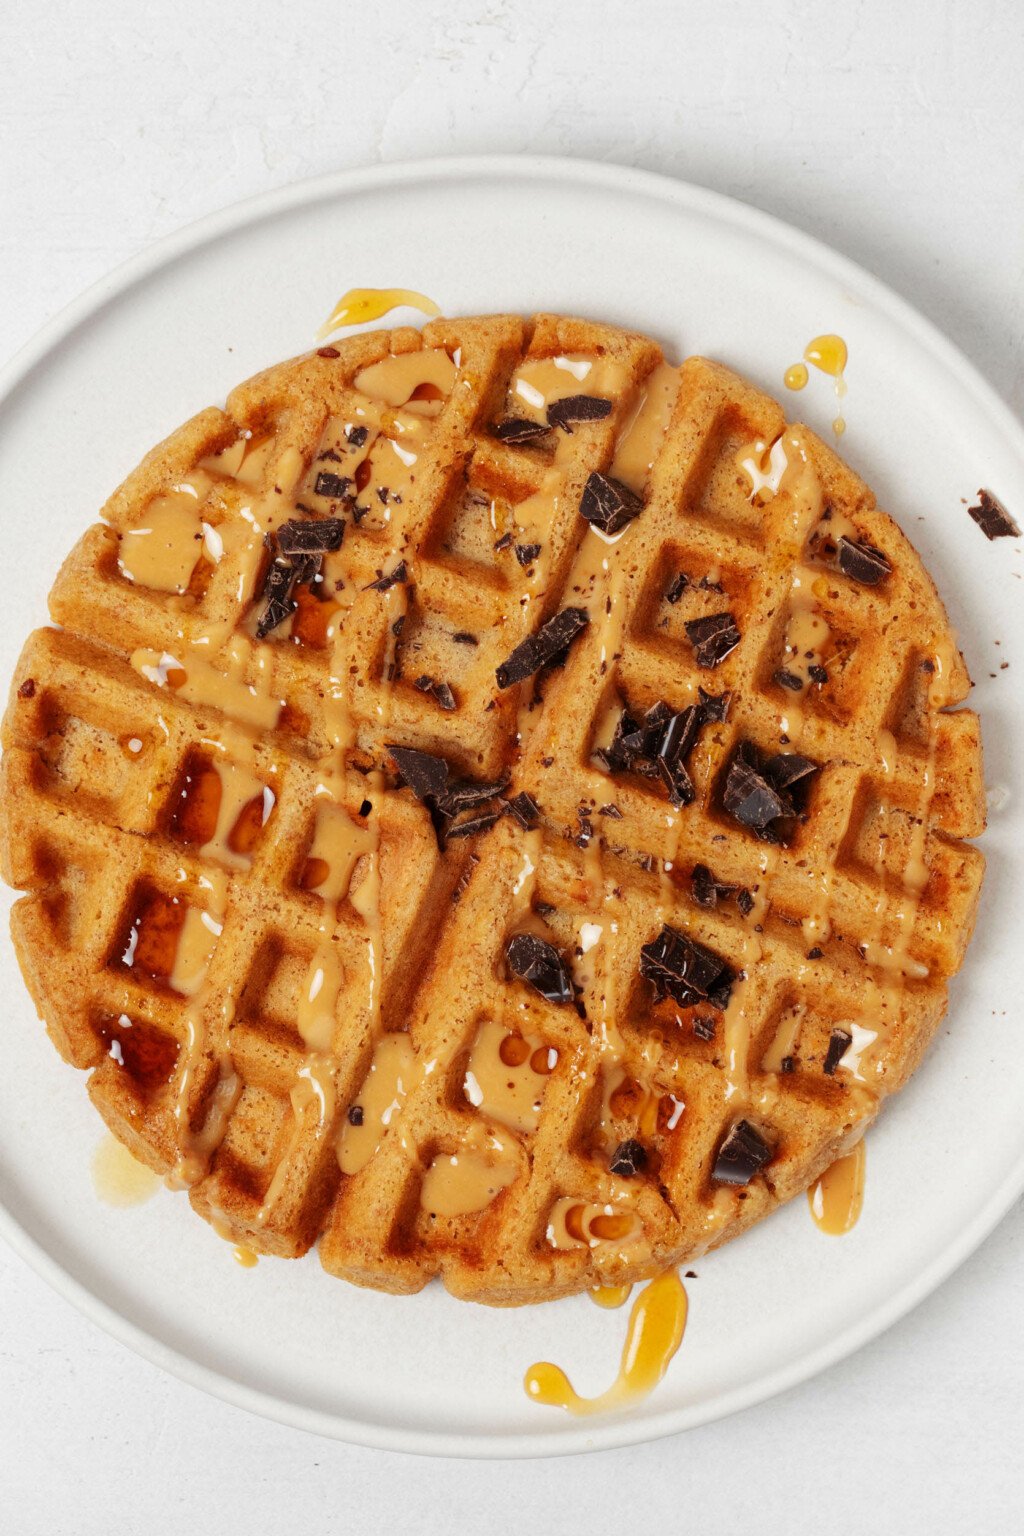 An overhead image of a round, white plate, which is holding a light and crispy vegan peanut butter waffle. The waffle is topped with chopped dark chocolate and a drizzle of peanut butter.